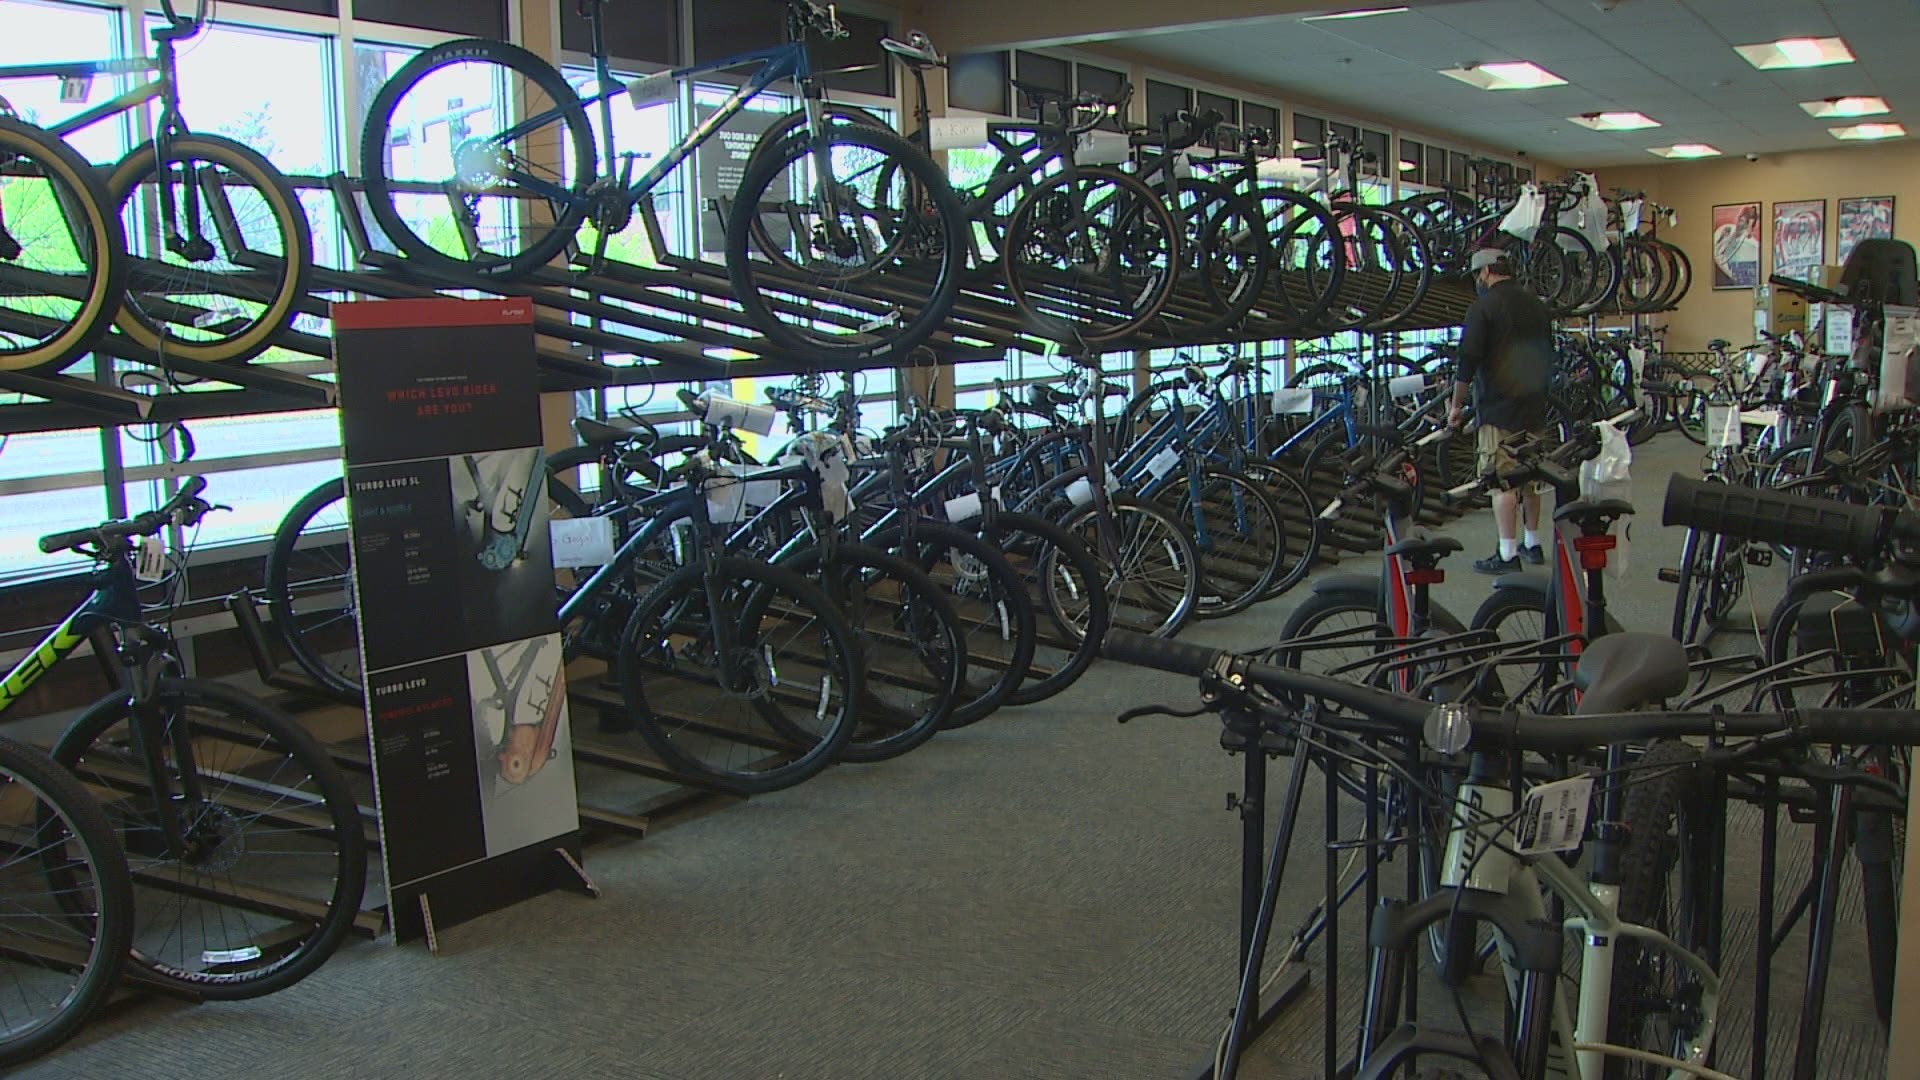 Gregg's Cycle in Lynnwood currently has 8,000 bikes on back order due to the supply shortage and demand for bicycles during the pandemic.